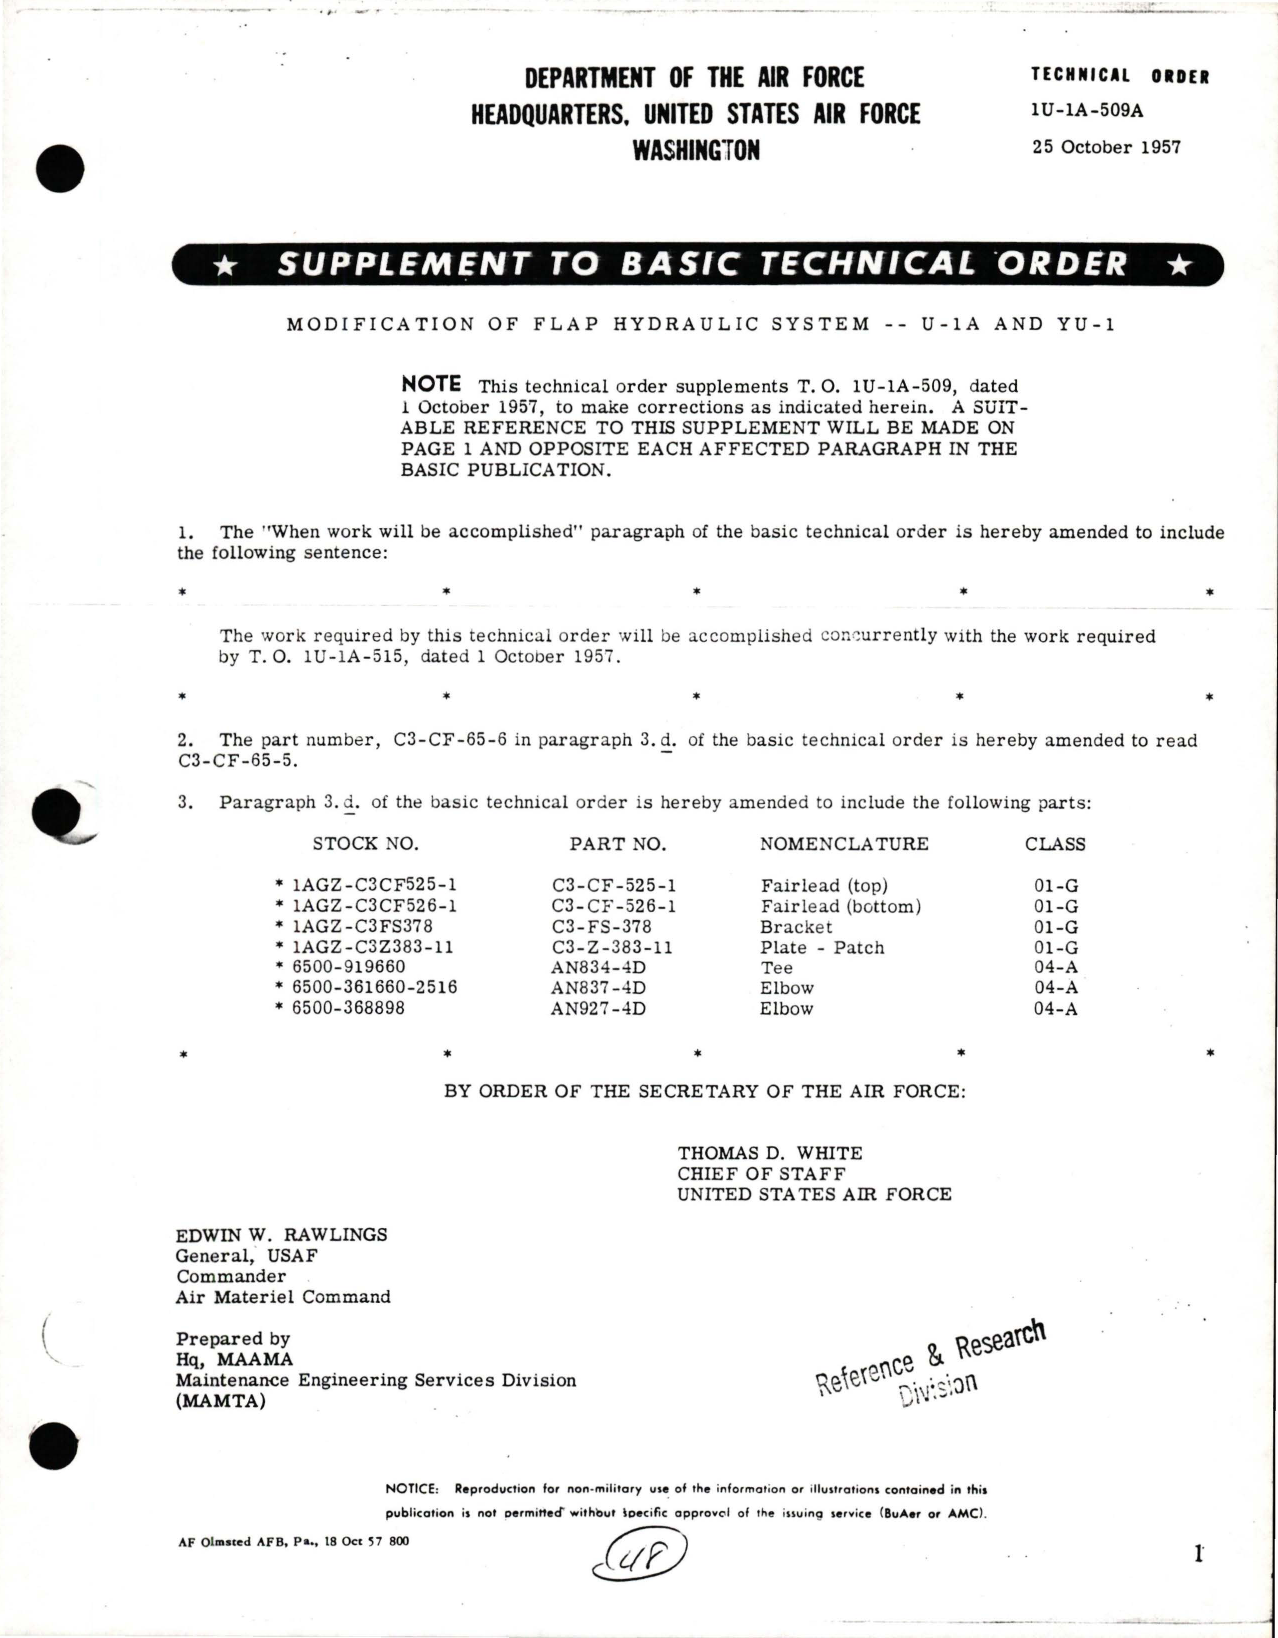 Sample page 1 from AirCorps Library document: Supplement to Modification of Flap Hydraulic System for U-1A and YU-1